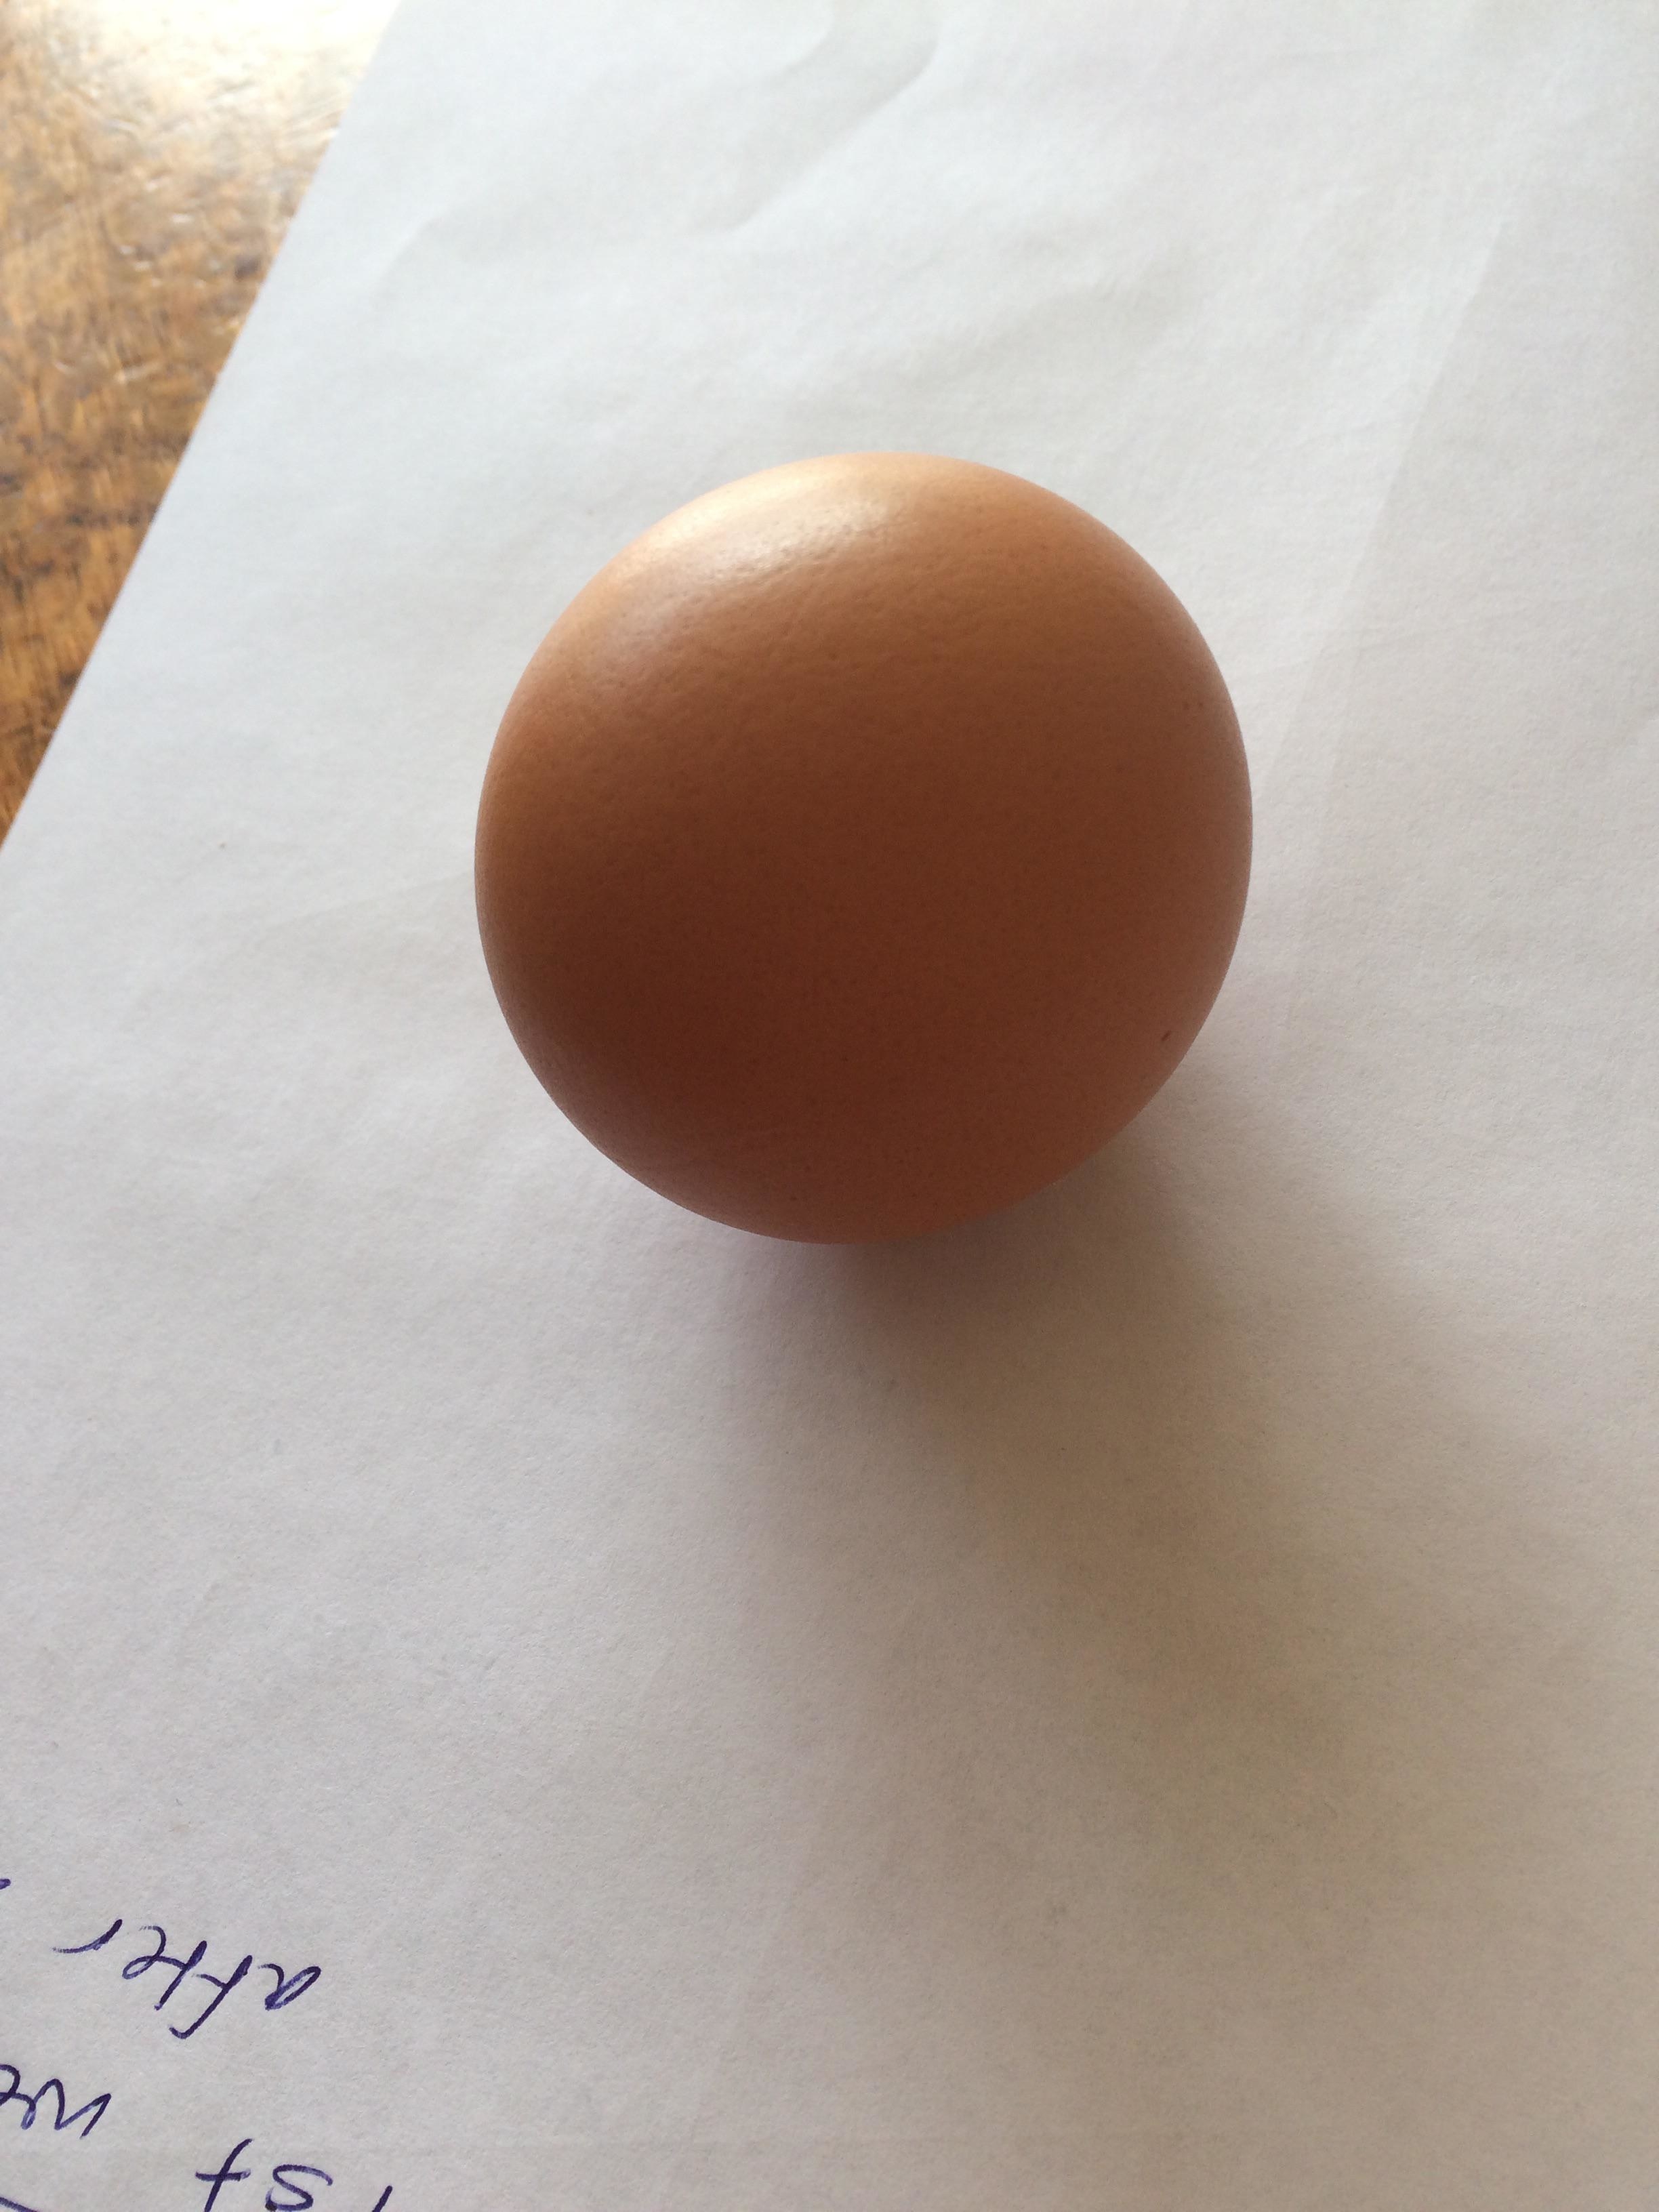 A perfectly round brown egg